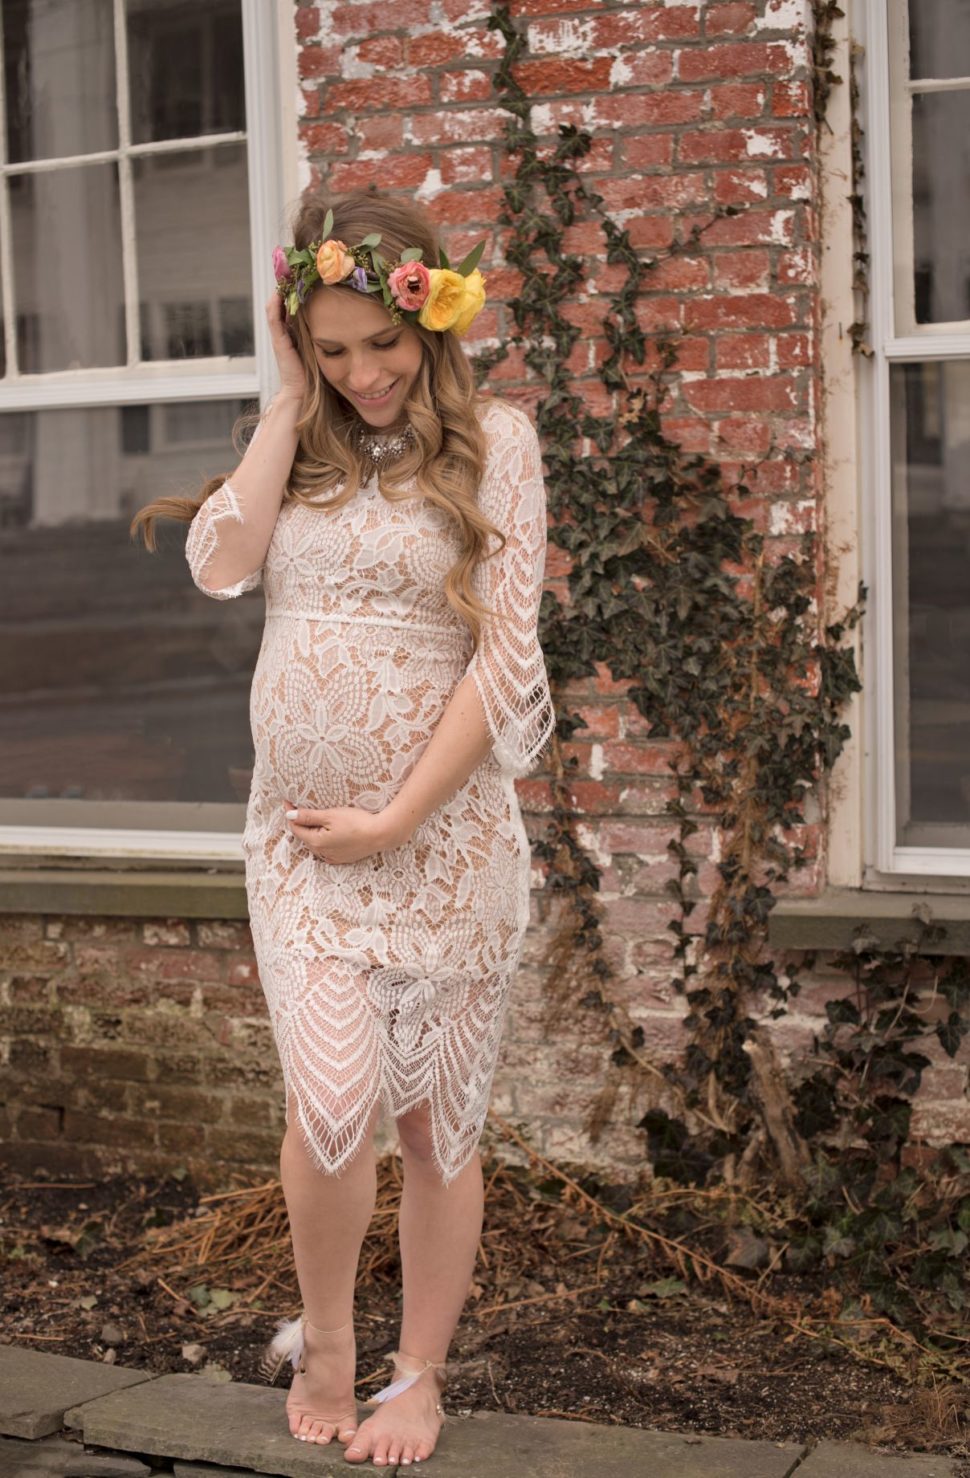 Medium Size of Baby Shower:alluring Baby Shower Dresses Baby Shower Dresses Cute Inexpensive Maternity Clothes Maternity Evening Gowns Plus Size Maternity Dresses For Baby Shower